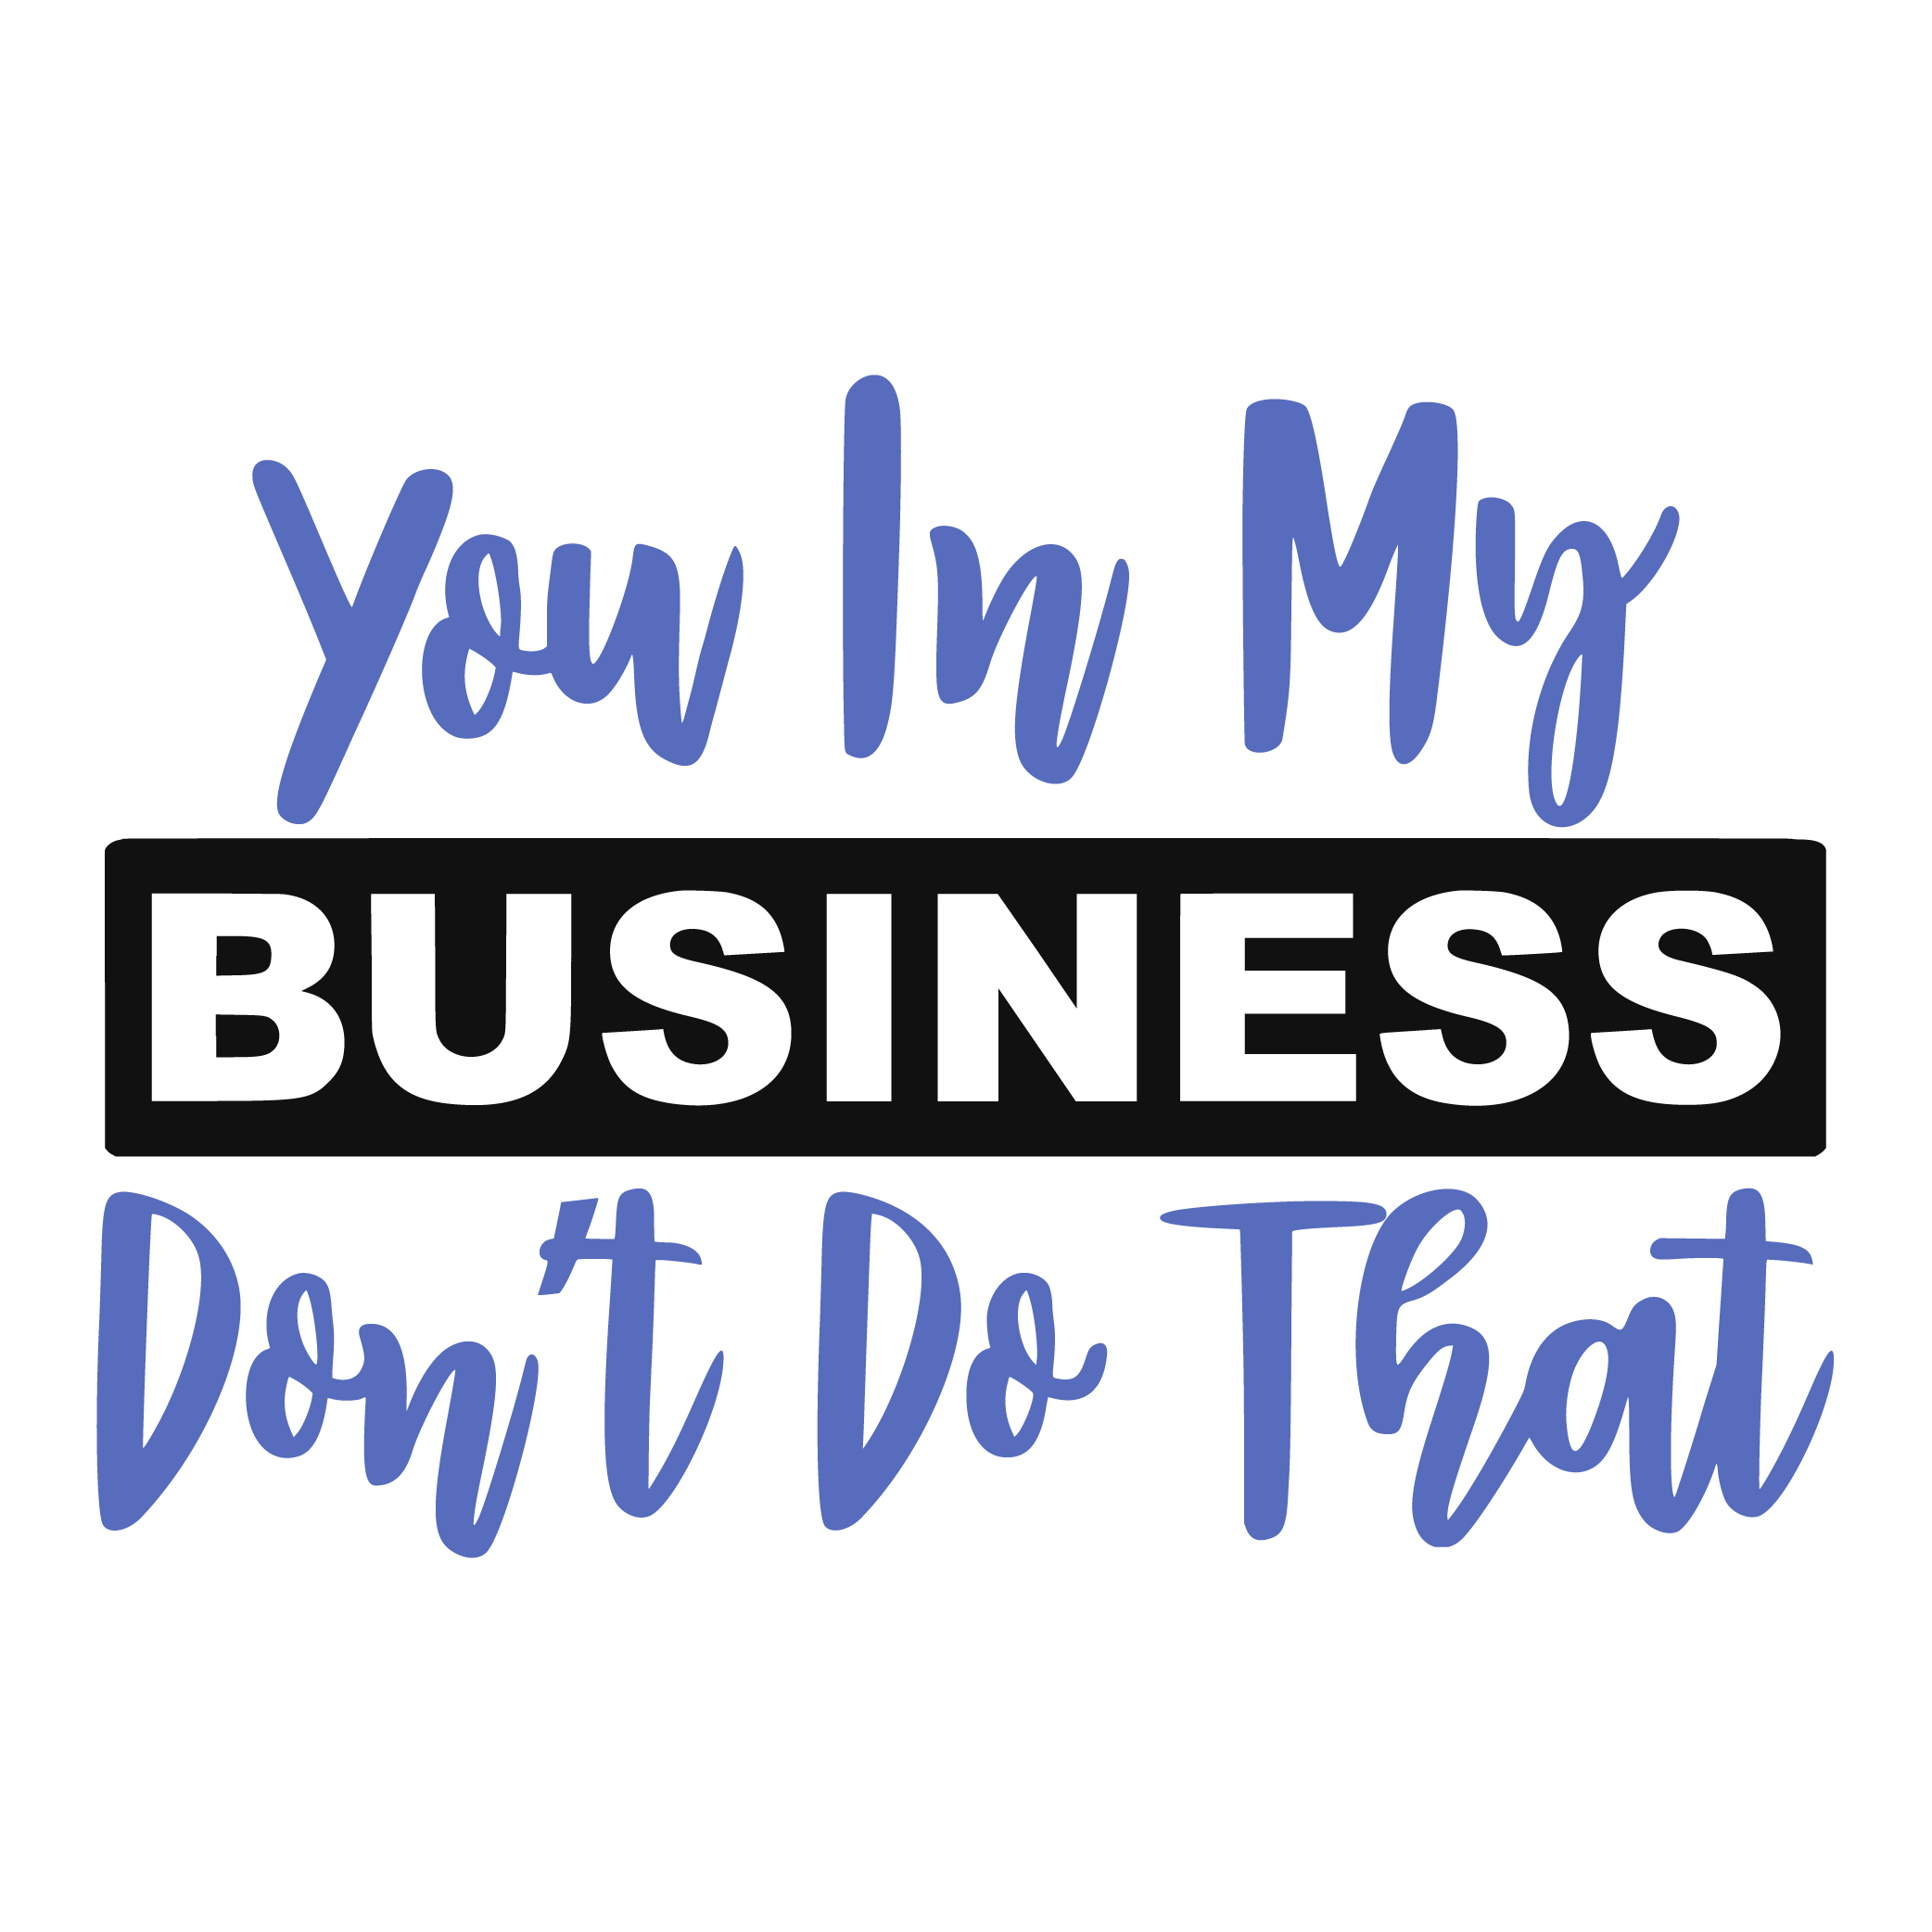 you in my business dont do that woman SVG Boss Lady  Black Lives Matter  Lady Woman Diva Tshirt Cut File Cricut Silhouette Women Empowerment svg Feminism svg Girl Power 